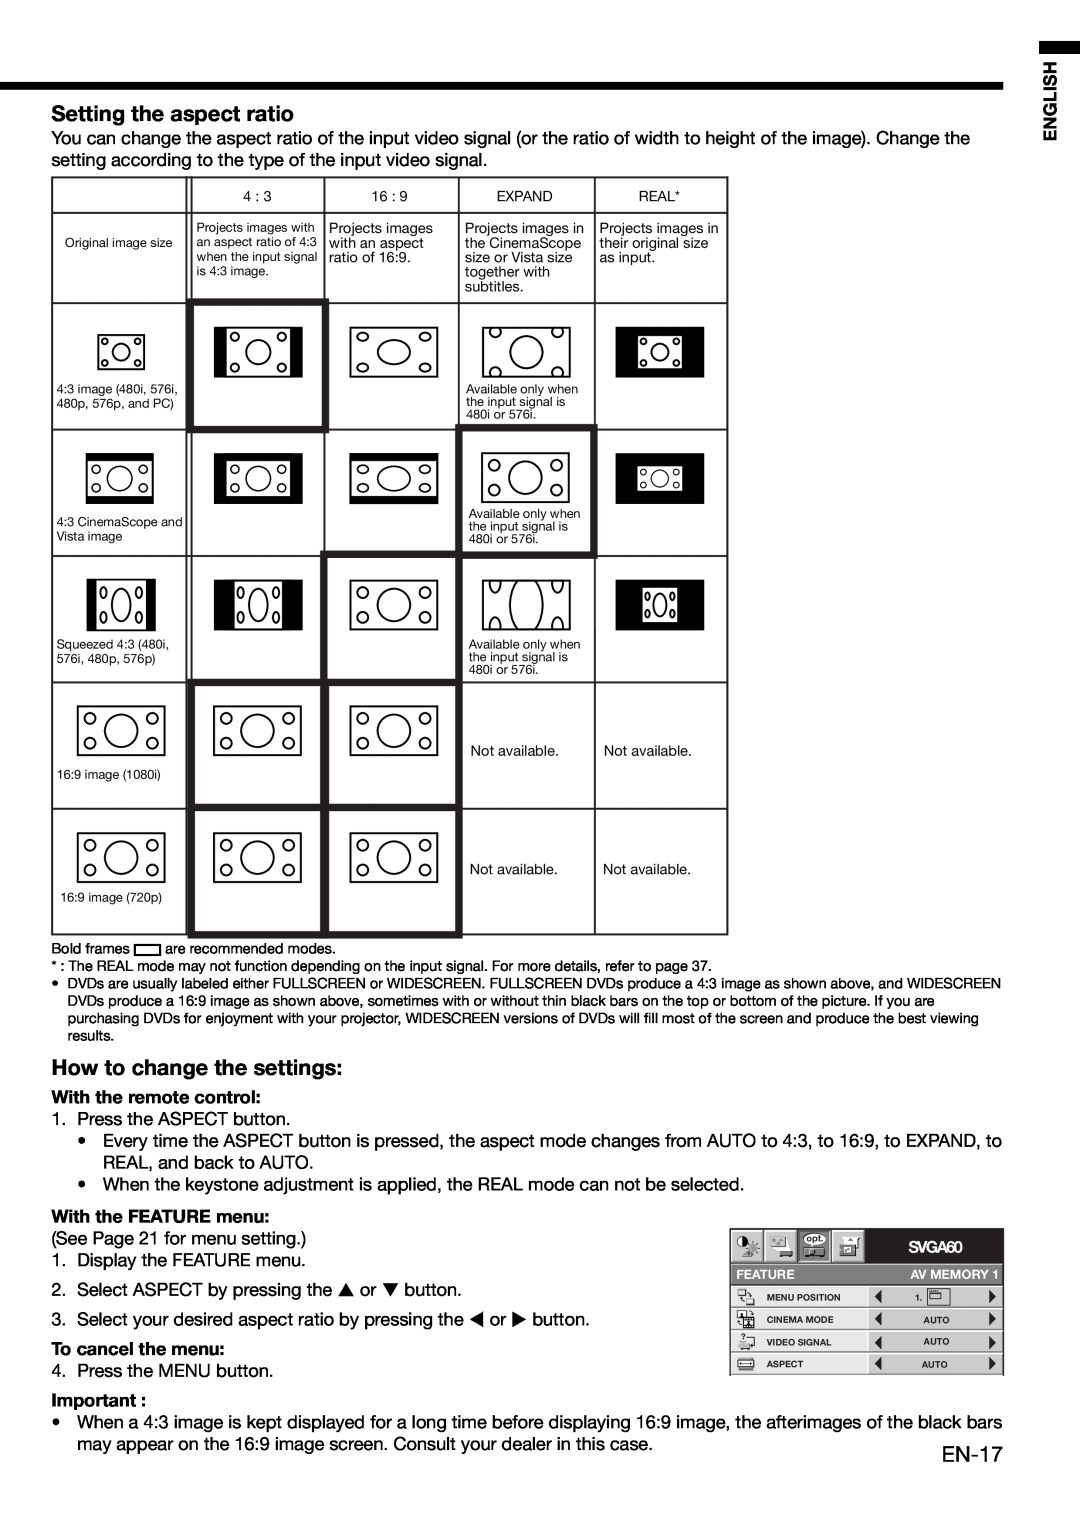 Mitsubishi Electronics HC910 Setting the aspect ratio, How to change the settings, English, With the remote control 